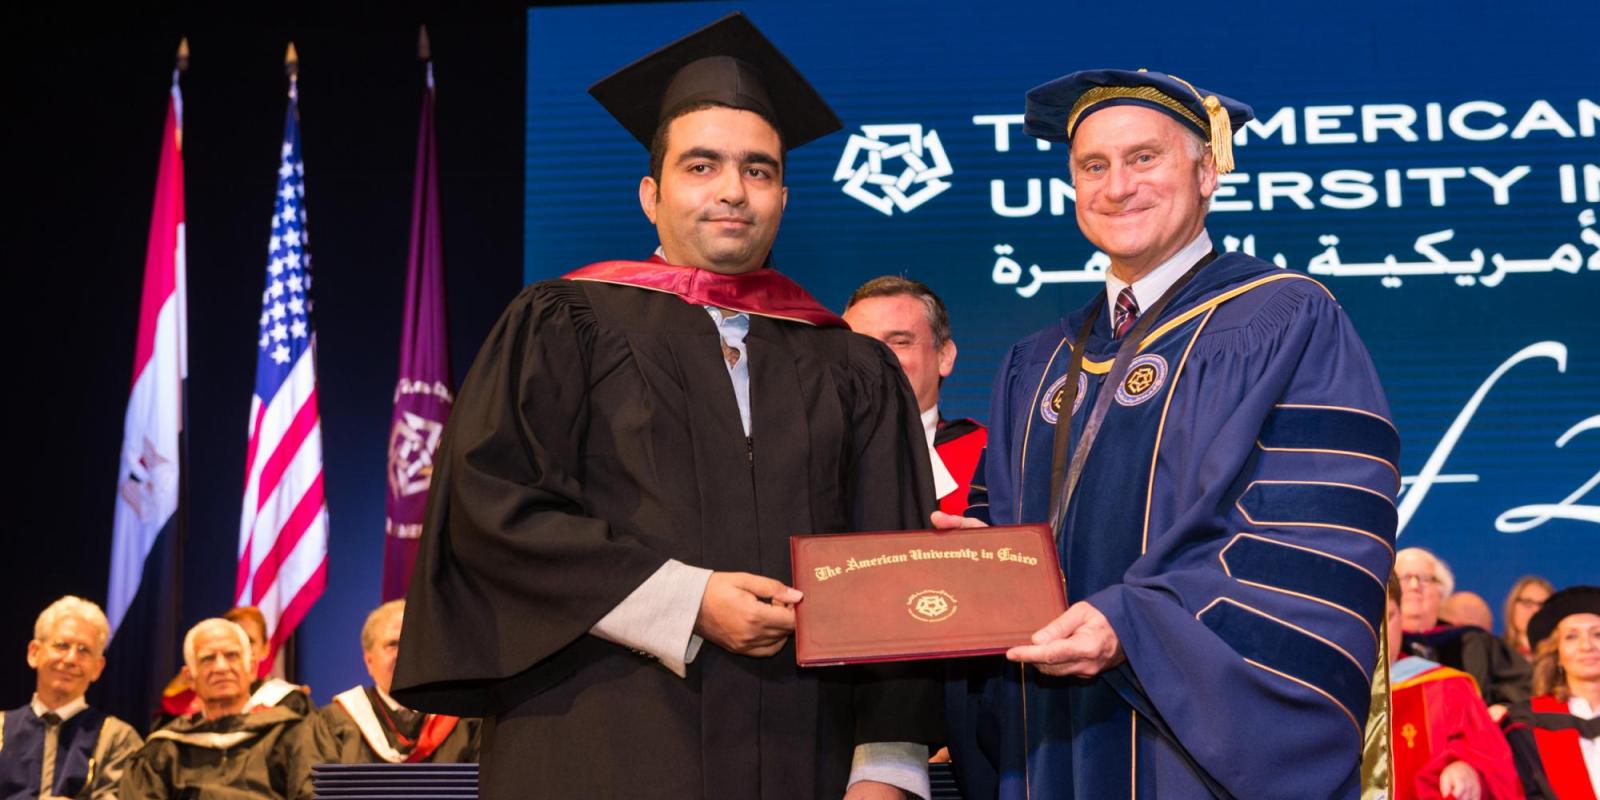 Mohammed Swillam, associate professor in the Department of Physics, received the Faculty Merit Award.